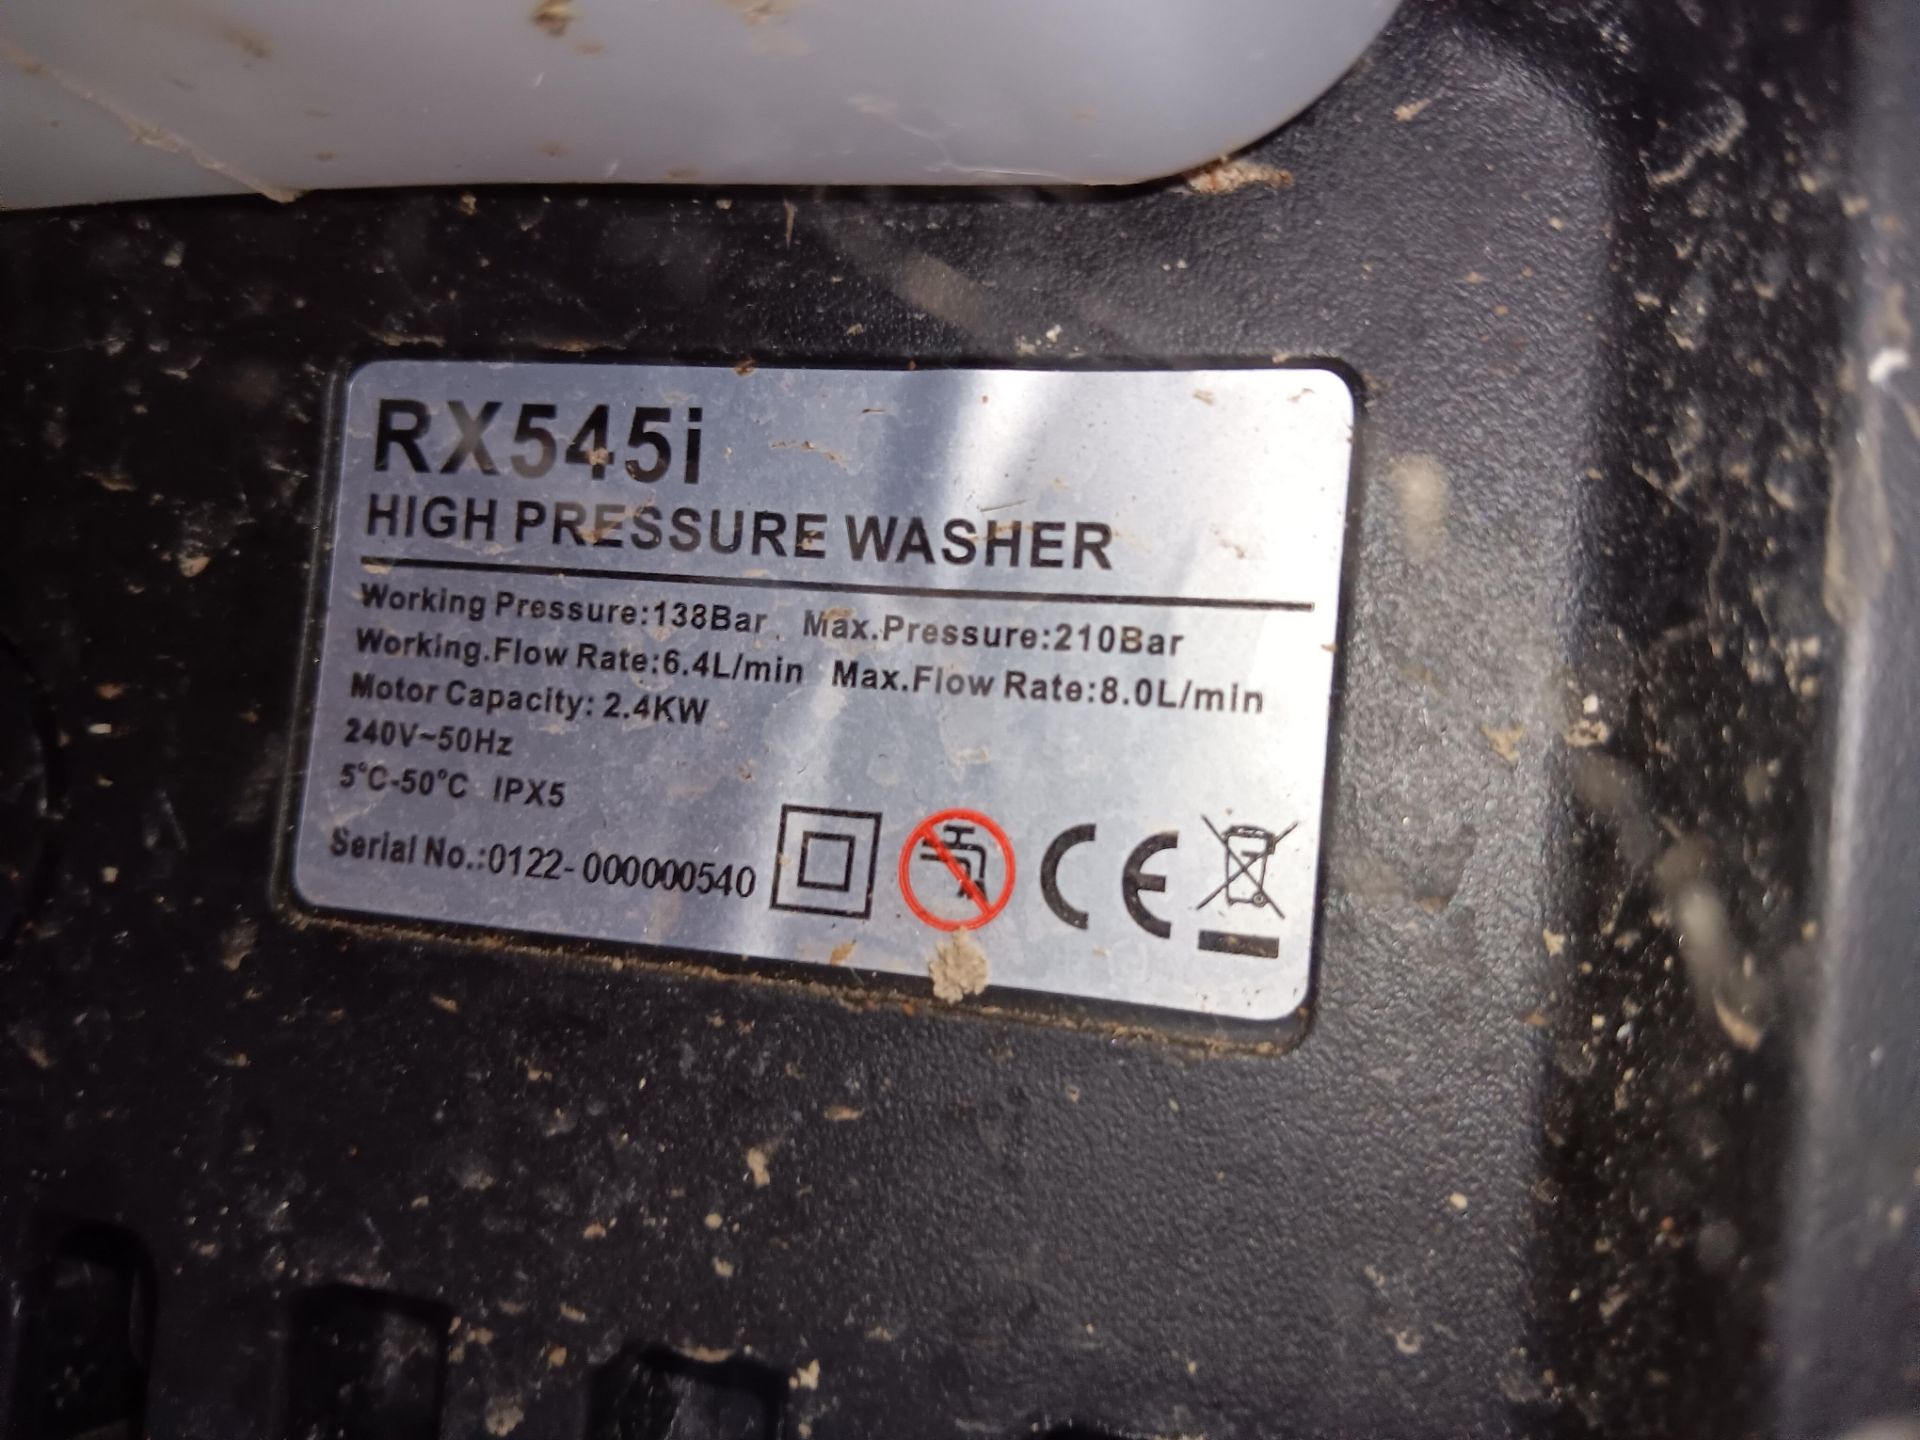 Wilks USA RX545i pressure washer, serial number 0122-000000540 - Image 4 of 4